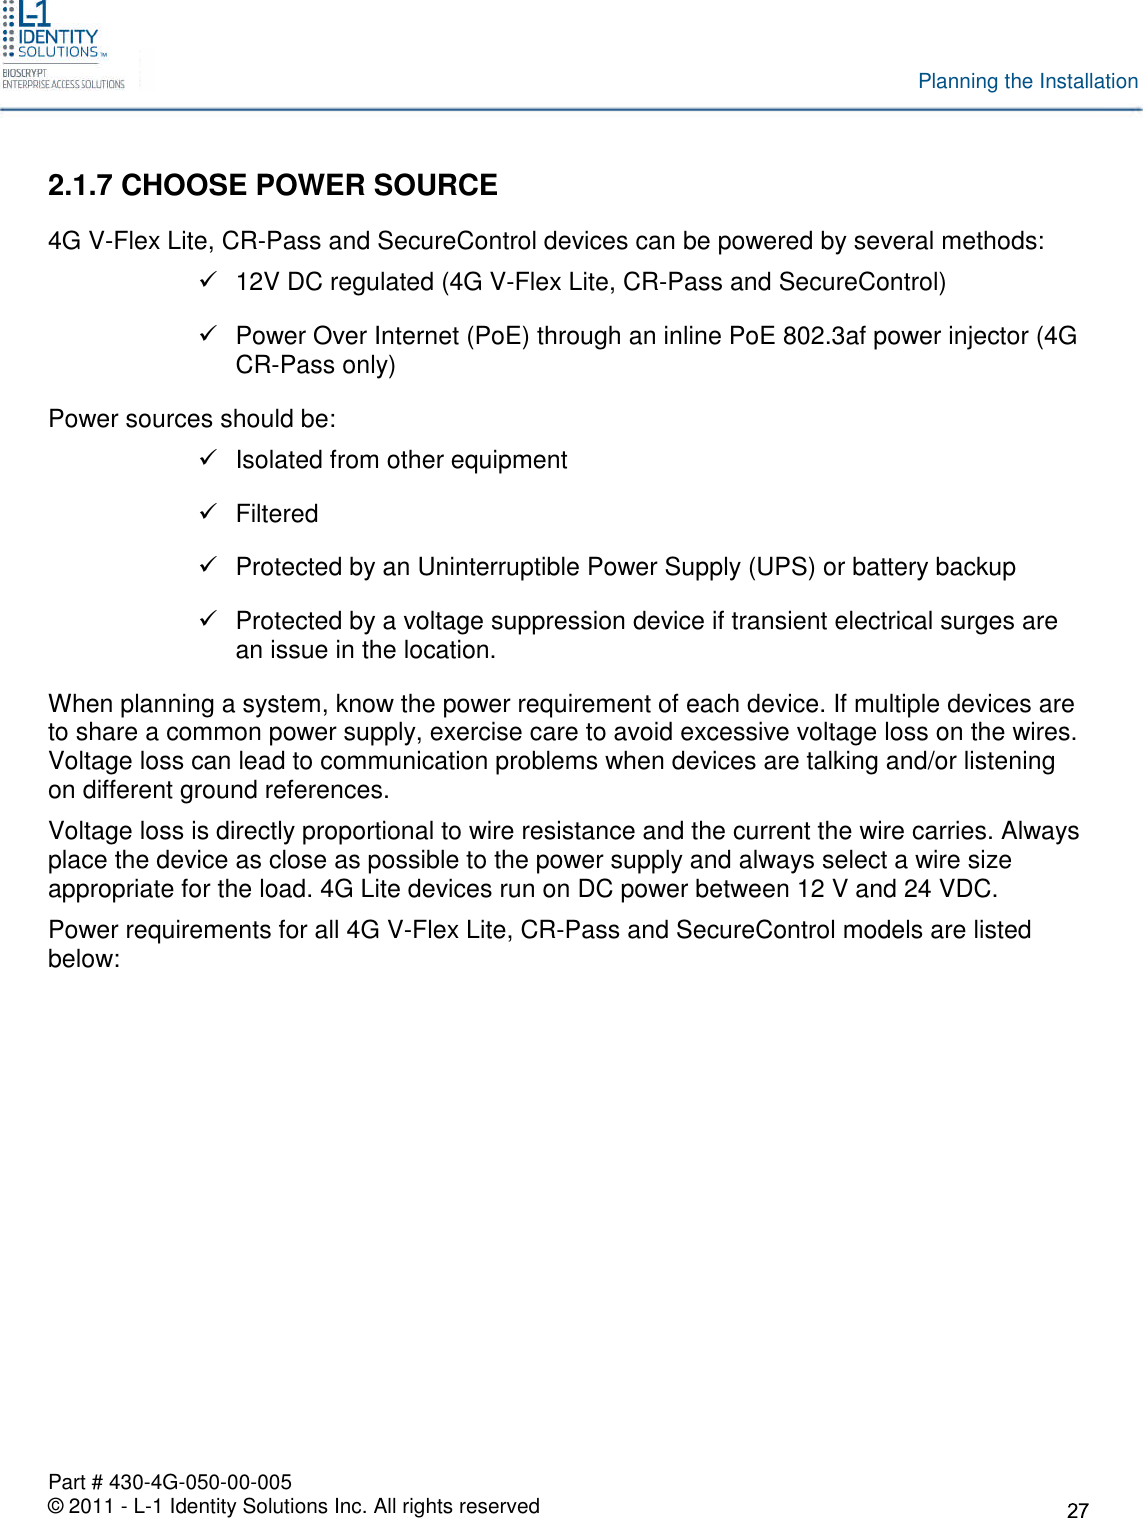 Part # 430-4G-050-00-005© 2011 - L-1 Identity Solutions Inc. All rights reservedPlanning the Installation2.1.7 CHOOSE POWER SOURCE4G V-Flex Lite, CR-Pass and SecureControl devices can be powered by several methods:12V DC regulated (4G V-Flex Lite, CR-Pass and SecureControl)Power Over Internet (PoE) through an inline PoE 802.3af power injector (4GCR-Pass only)Power sources should be:Isolated from other equipmentFilteredProtected by an Uninterruptible Power Supply (UPS) or battery backupProtected by a voltage suppression device if transient electrical surges arean issue in the location.When planning a system, know the power requirement of each device. If multiple devices areto share a common power supply, exercise care to avoid excessive voltage loss on the wires.Voltage loss can lead to communication problems when devices are talking and/or listeningon different ground references.Voltage loss is directly proportional to wire resistance and the current the wire carries. Alwaysplace the device as close as possible to the power supply and always select a wire sizeappropriate for the load. 4G Lite devices run on DC power between 12 V and 24 VDC.Power requirements for all 4G V-Flex Lite, CR-Pass and SecureControl models are listedbelow: